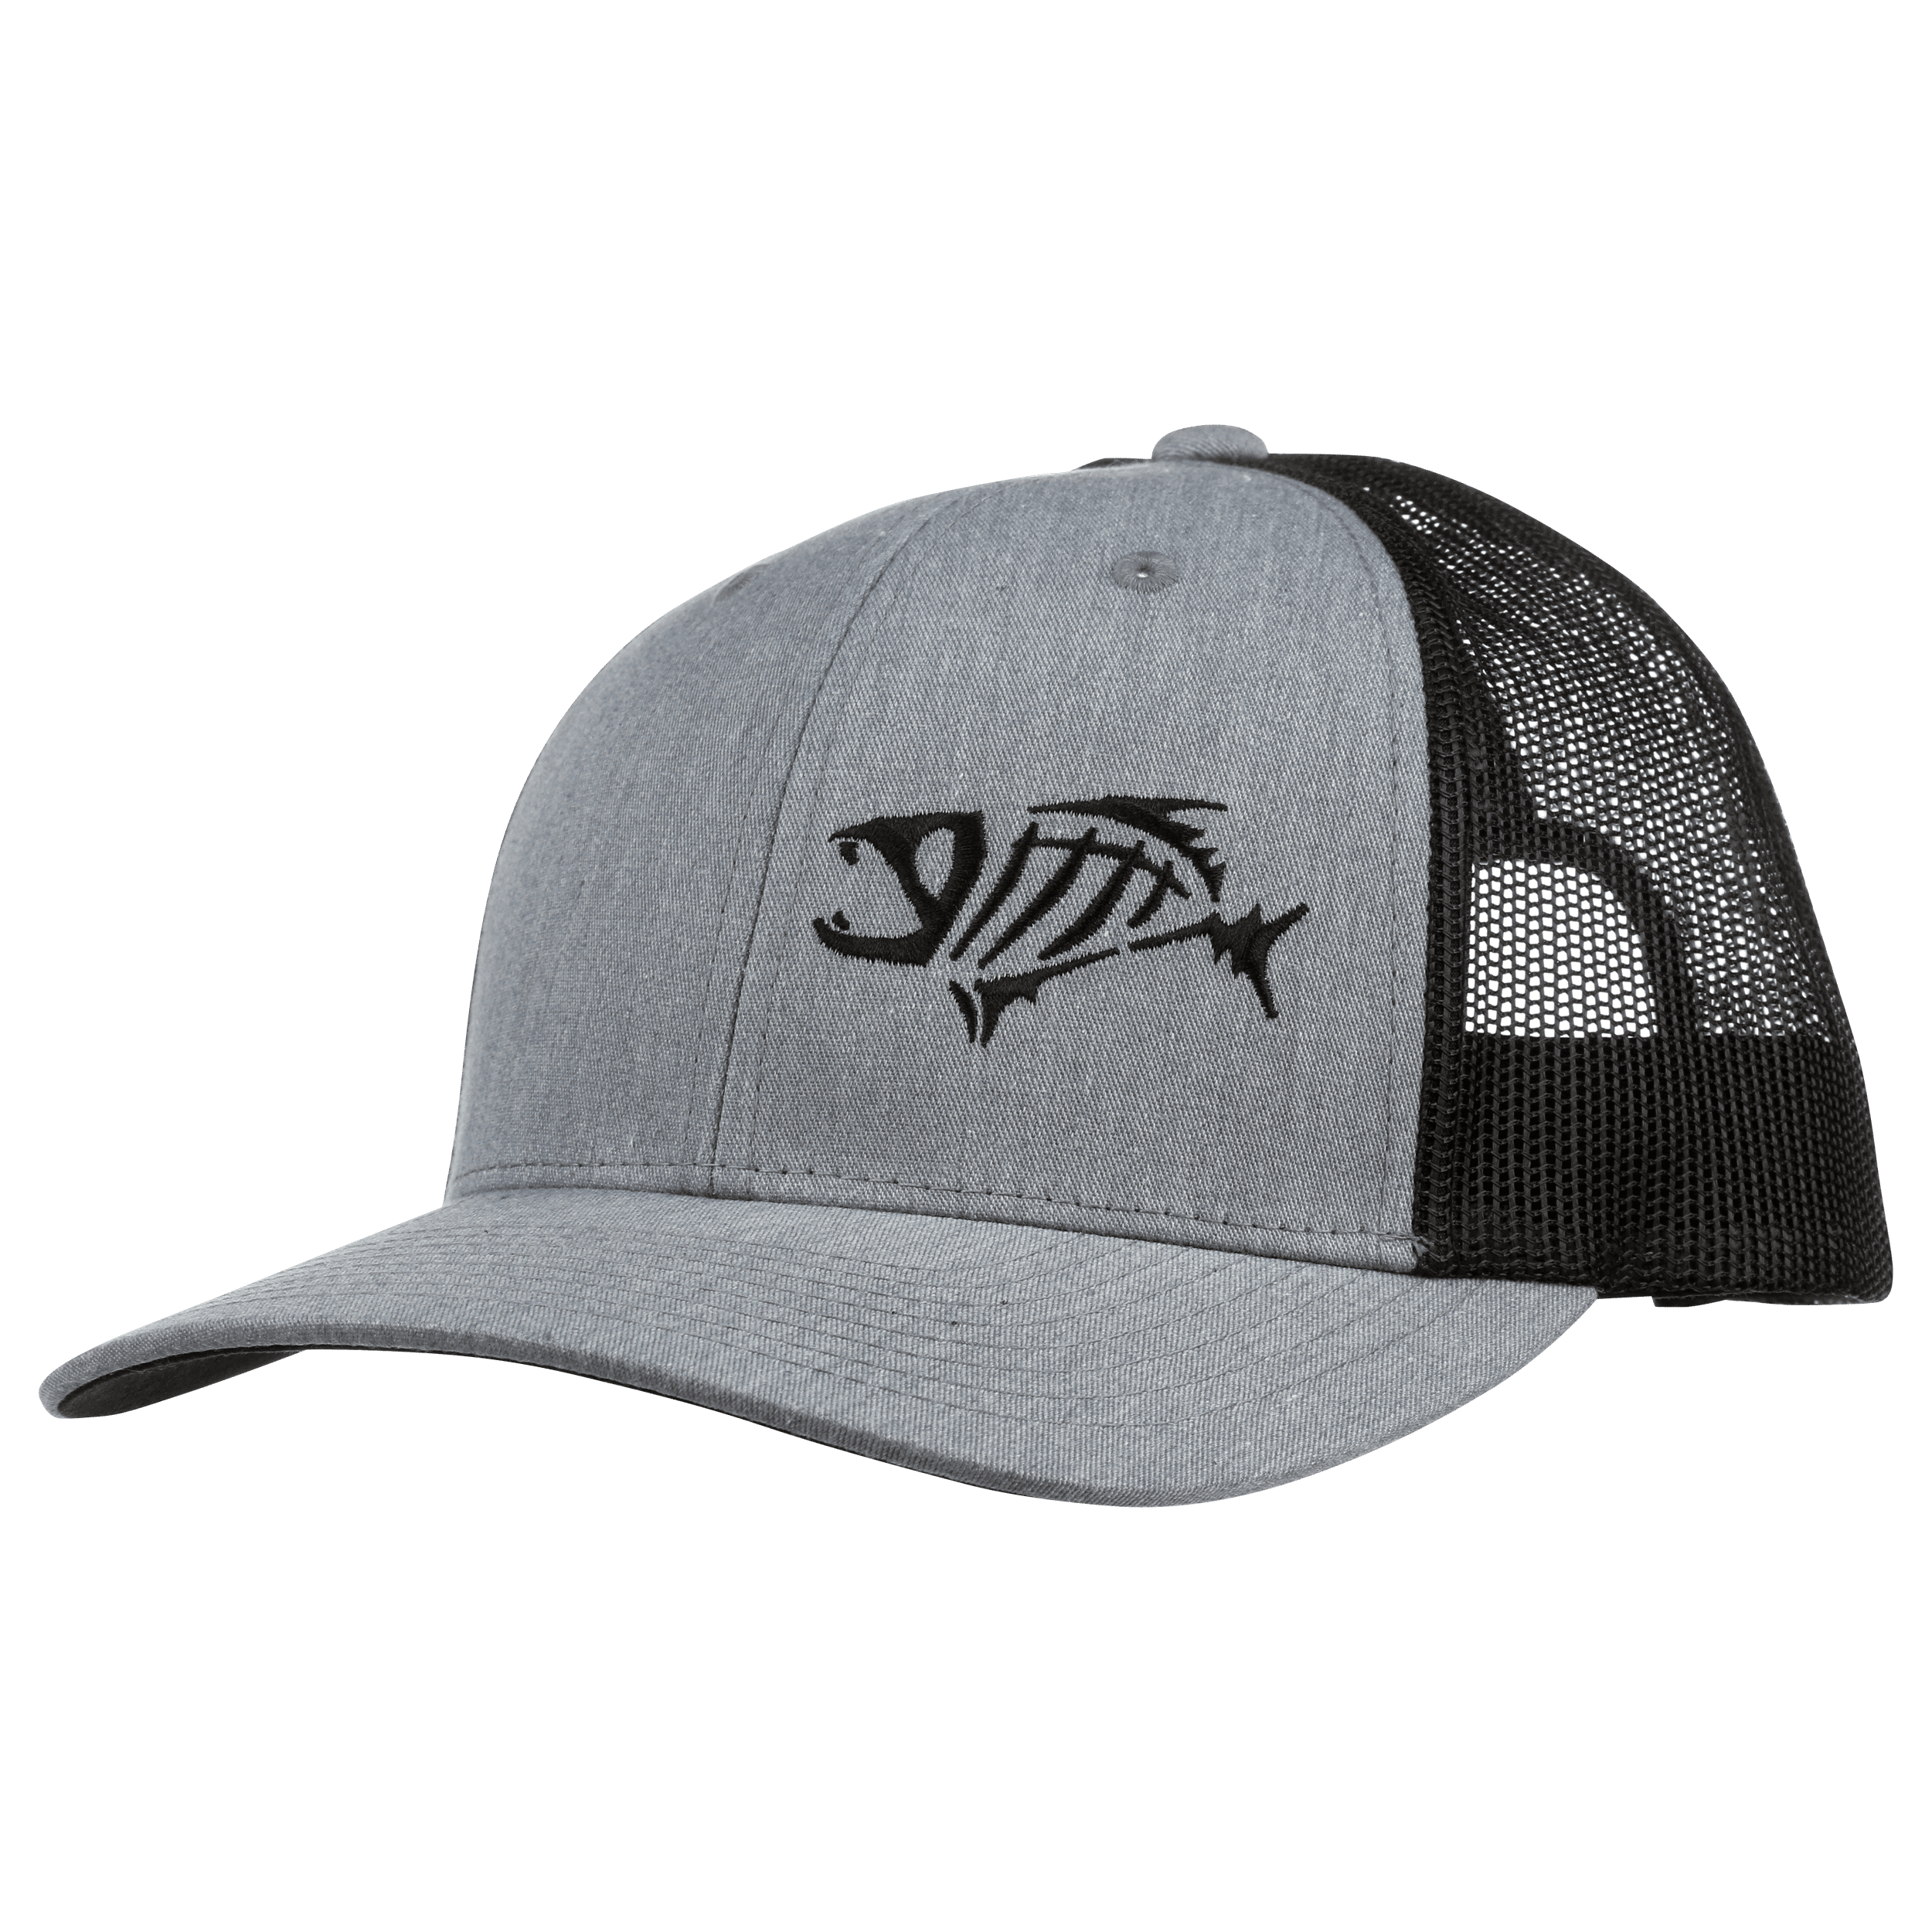 Gloomis Fishing Gloomis Low Hit Profile Cap - Gray, One Size Fits Most  [GHATLOWHITGY]